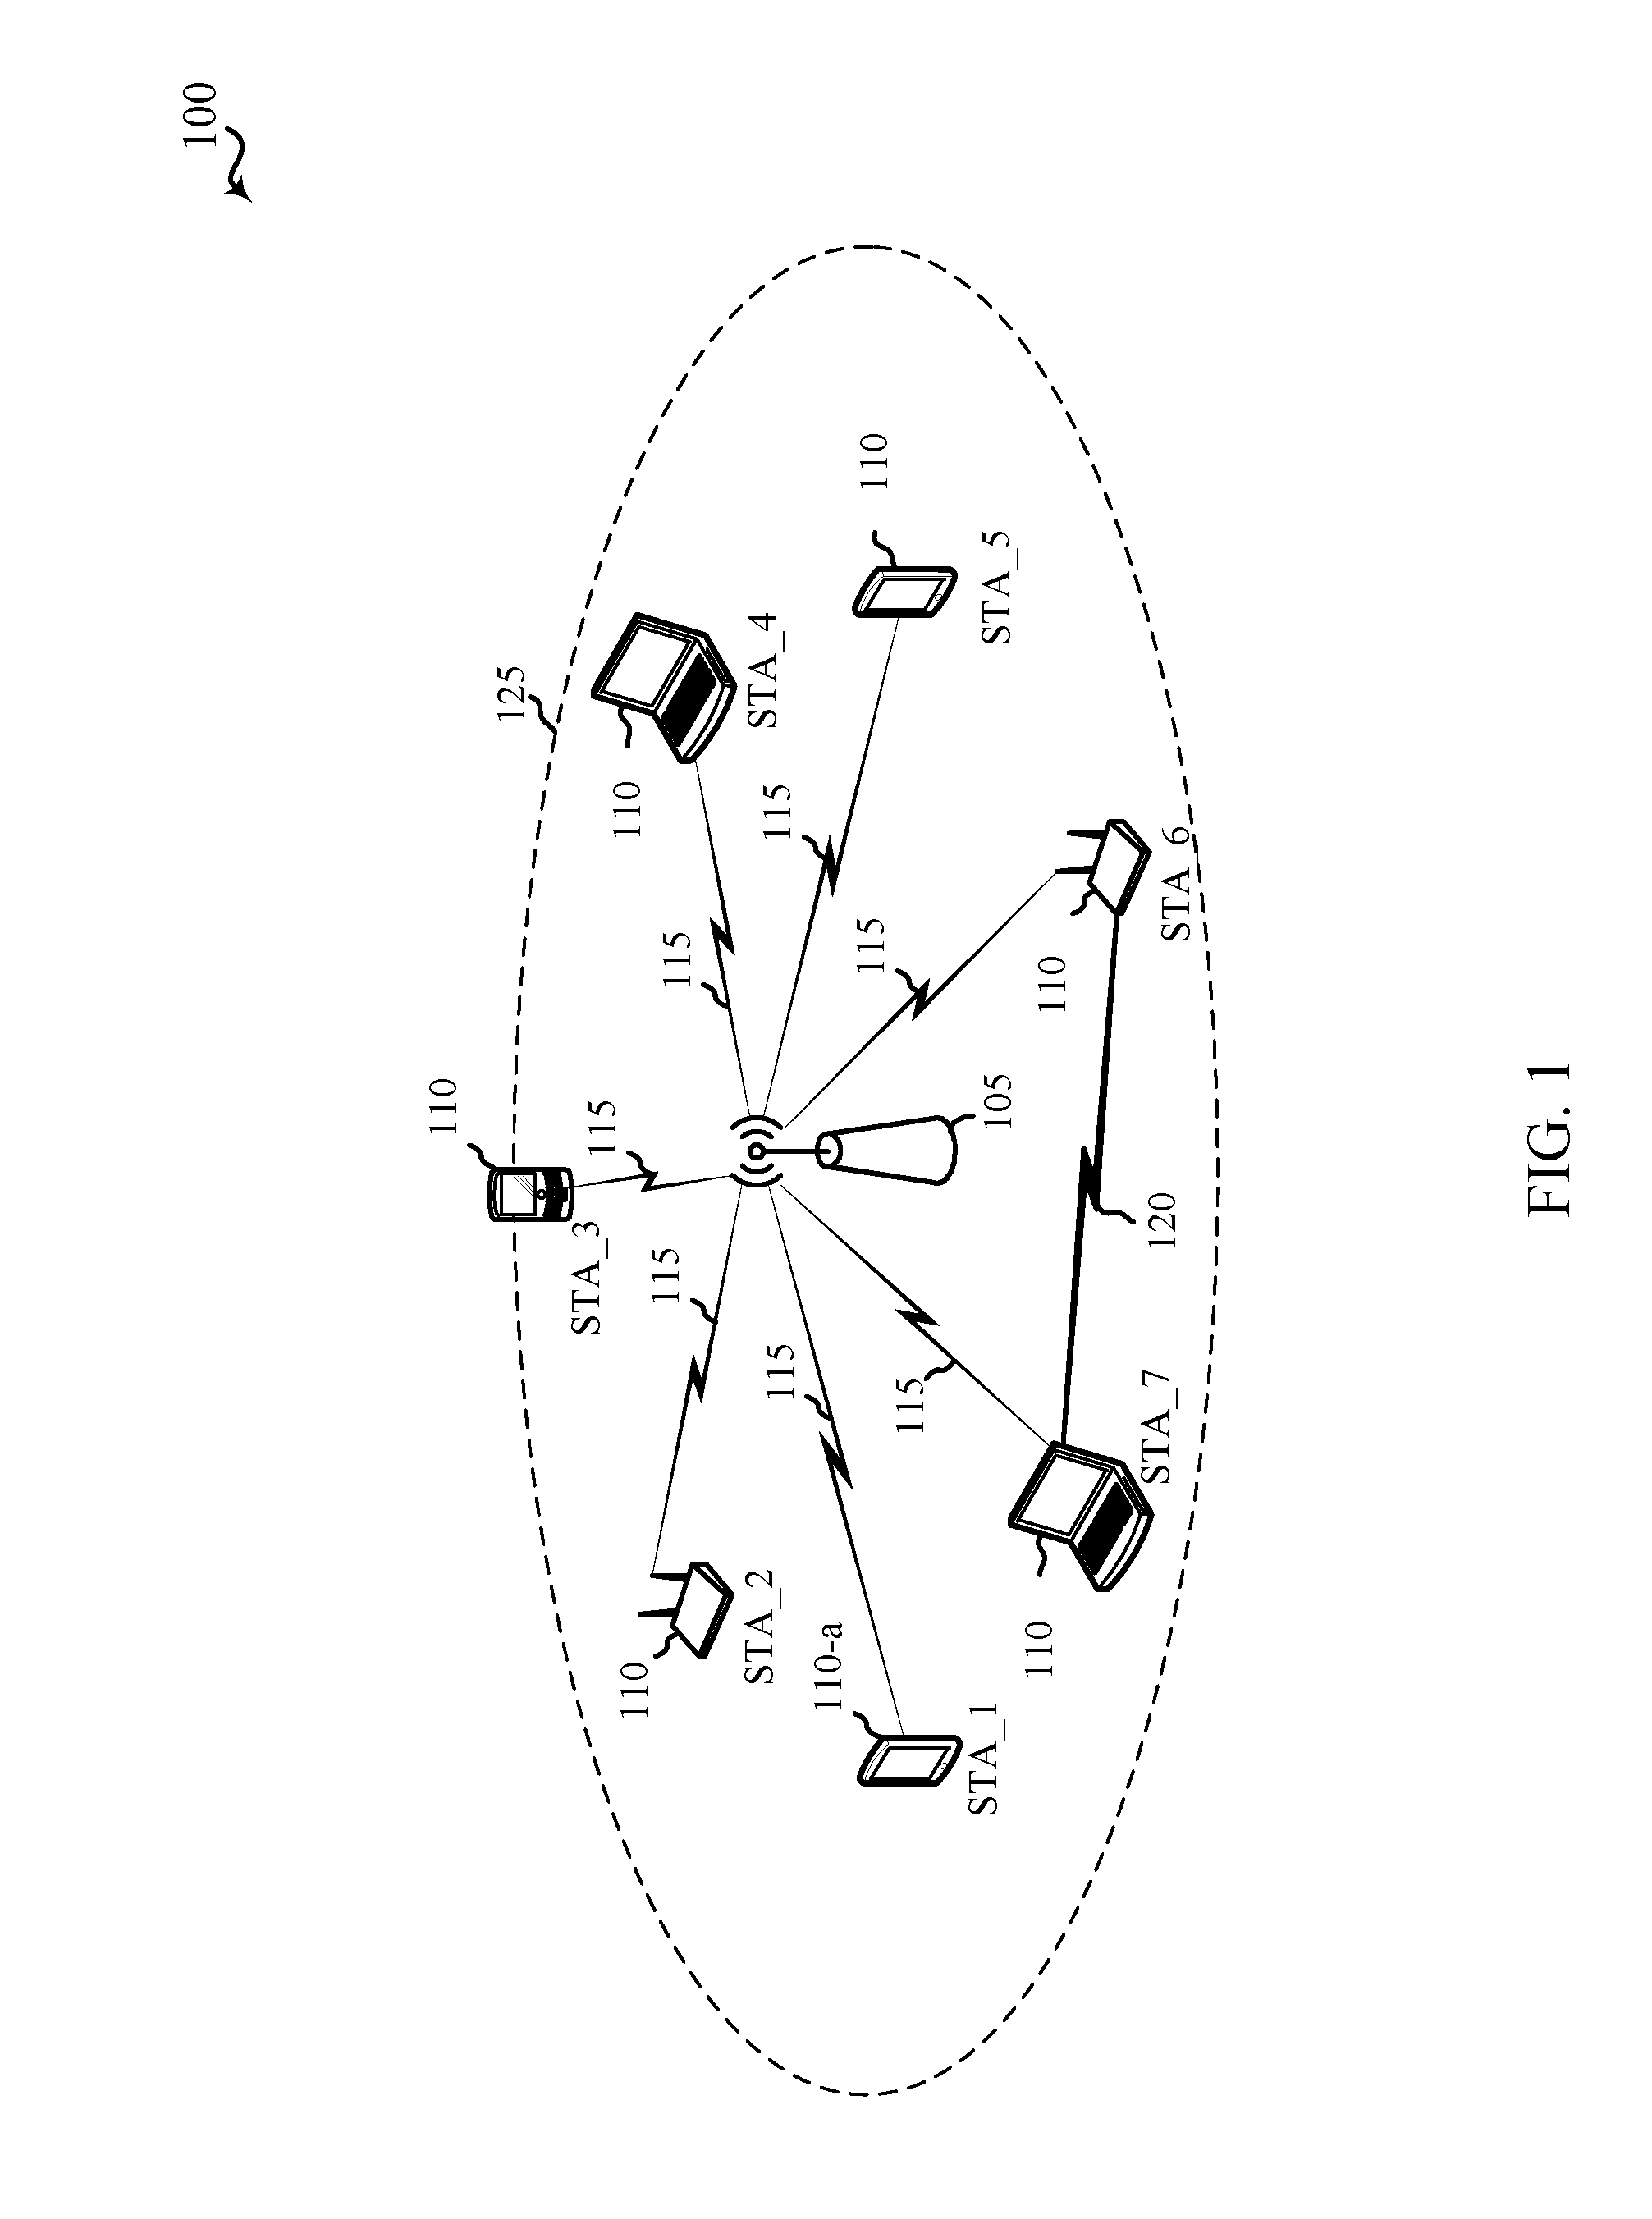 Techniques for protecting communications in wireless local area networks